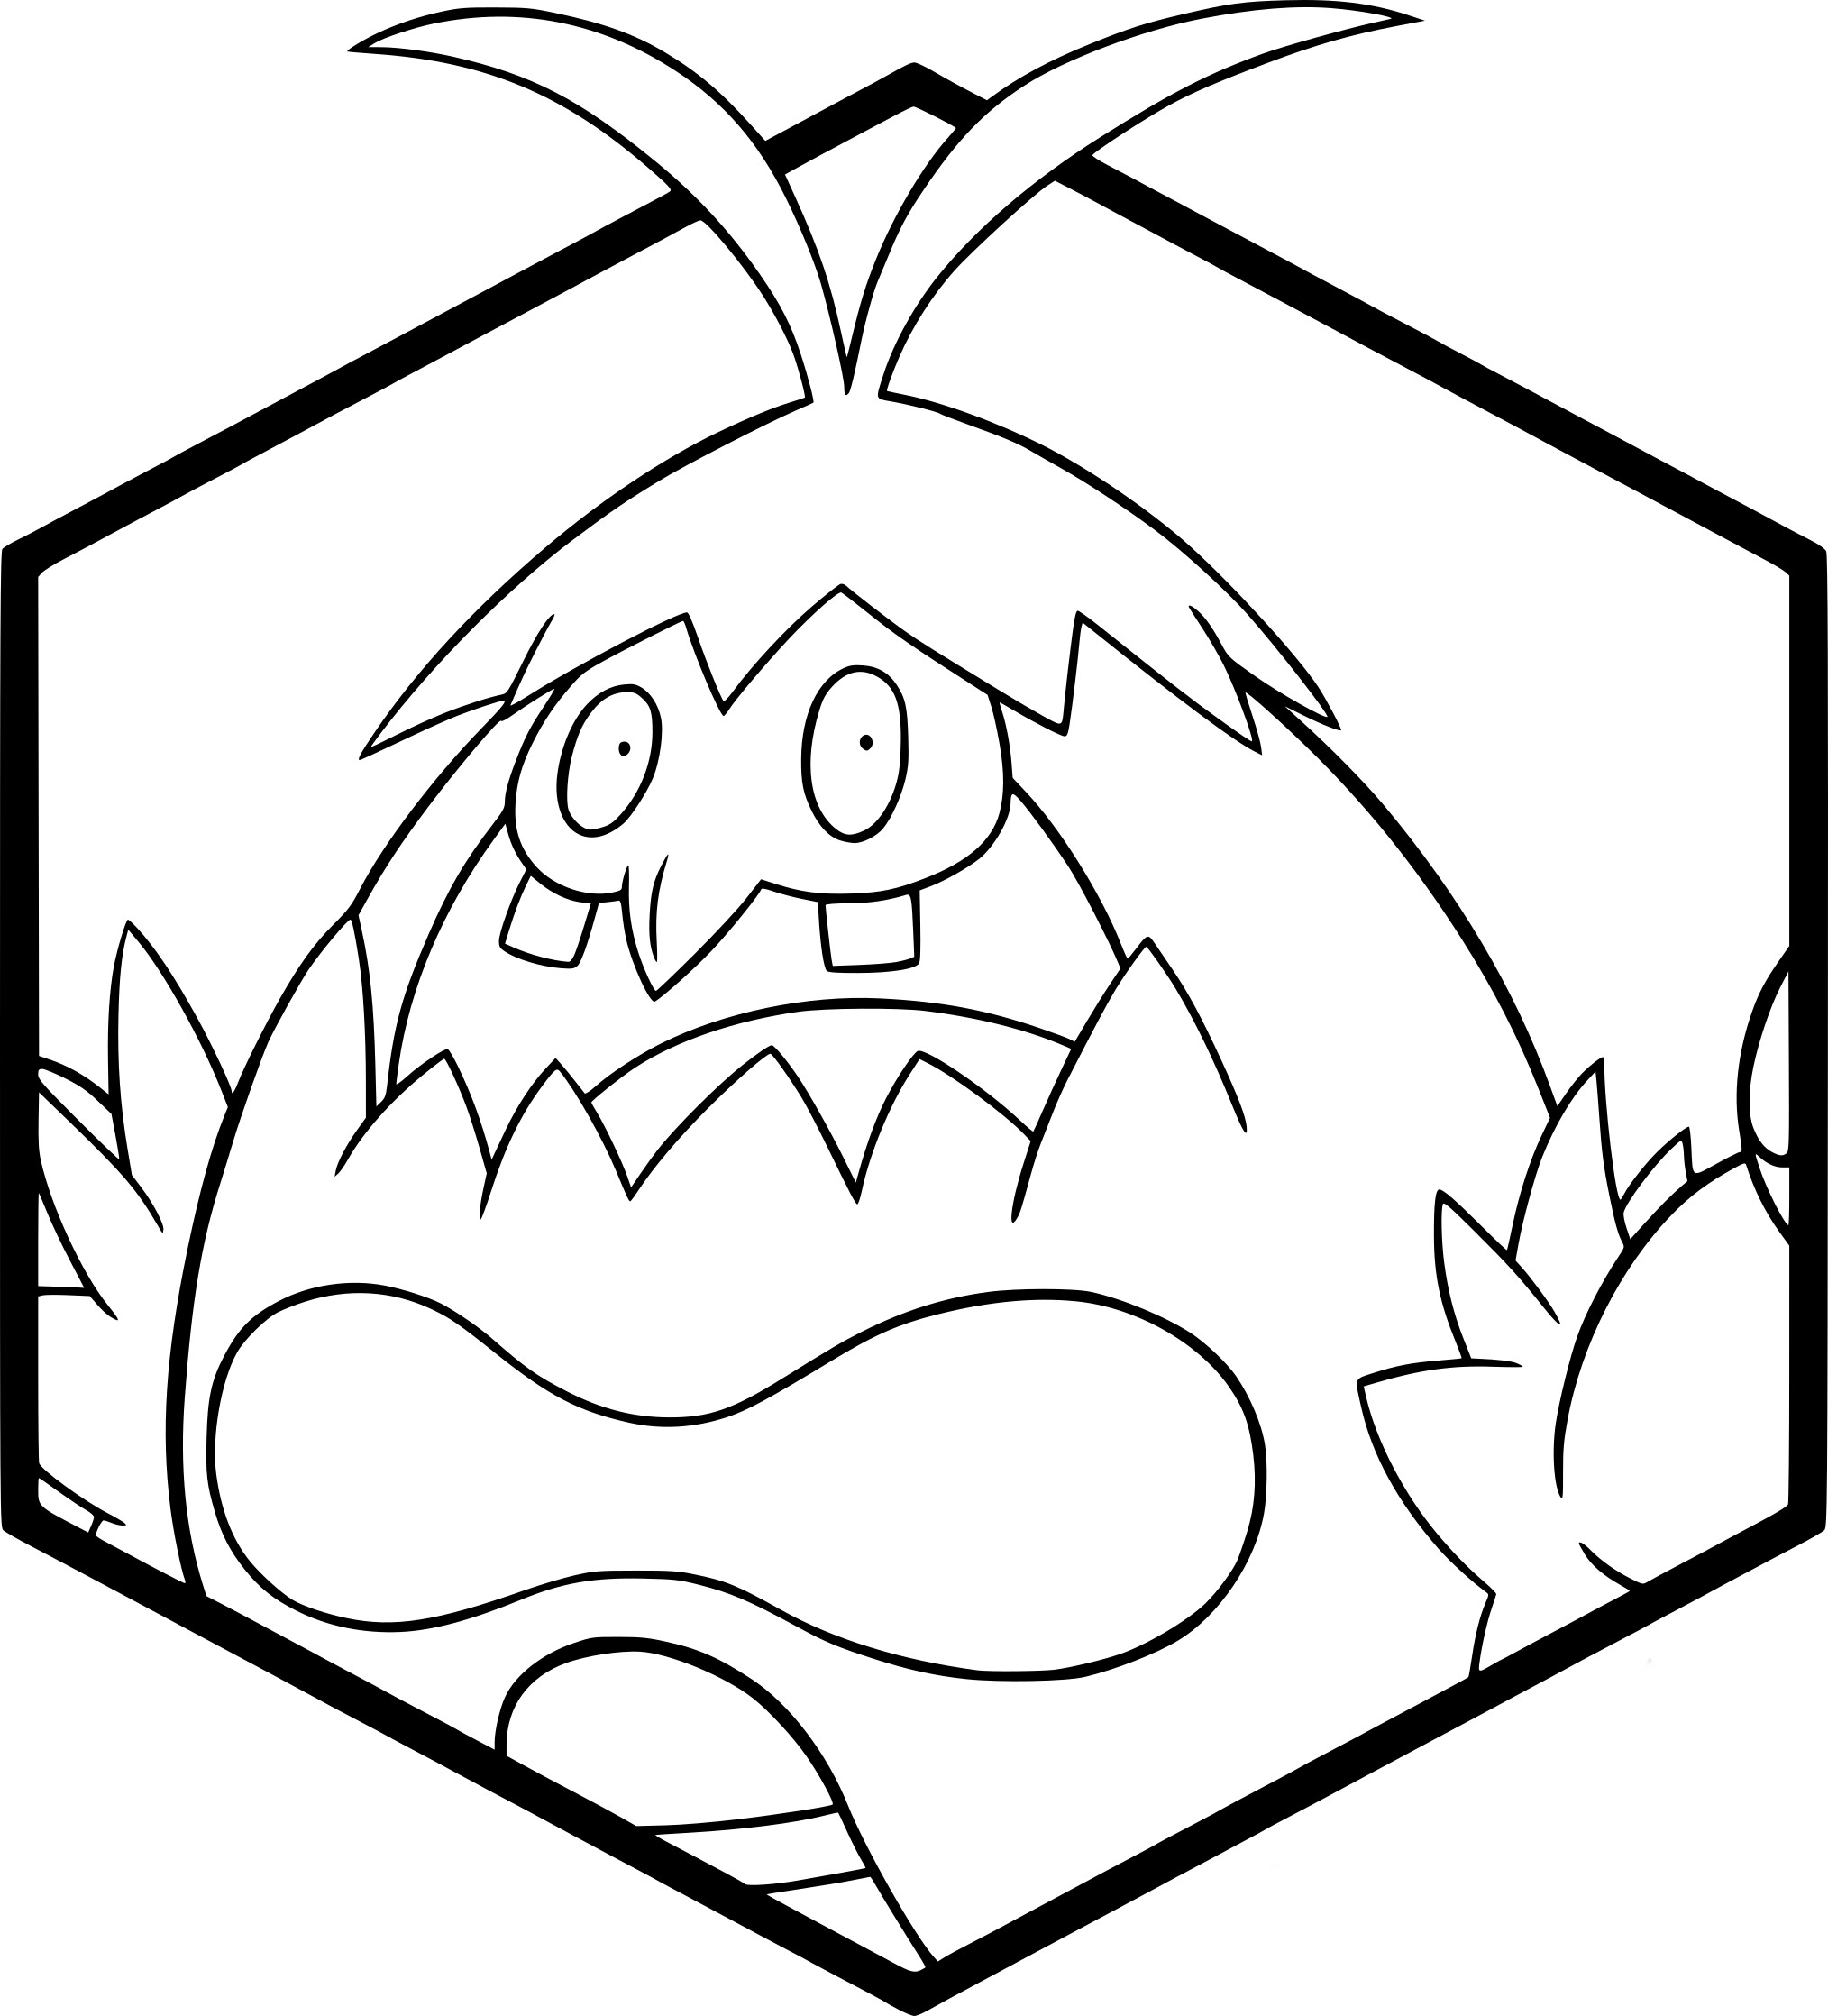 Crabominable Pokemon coloring page